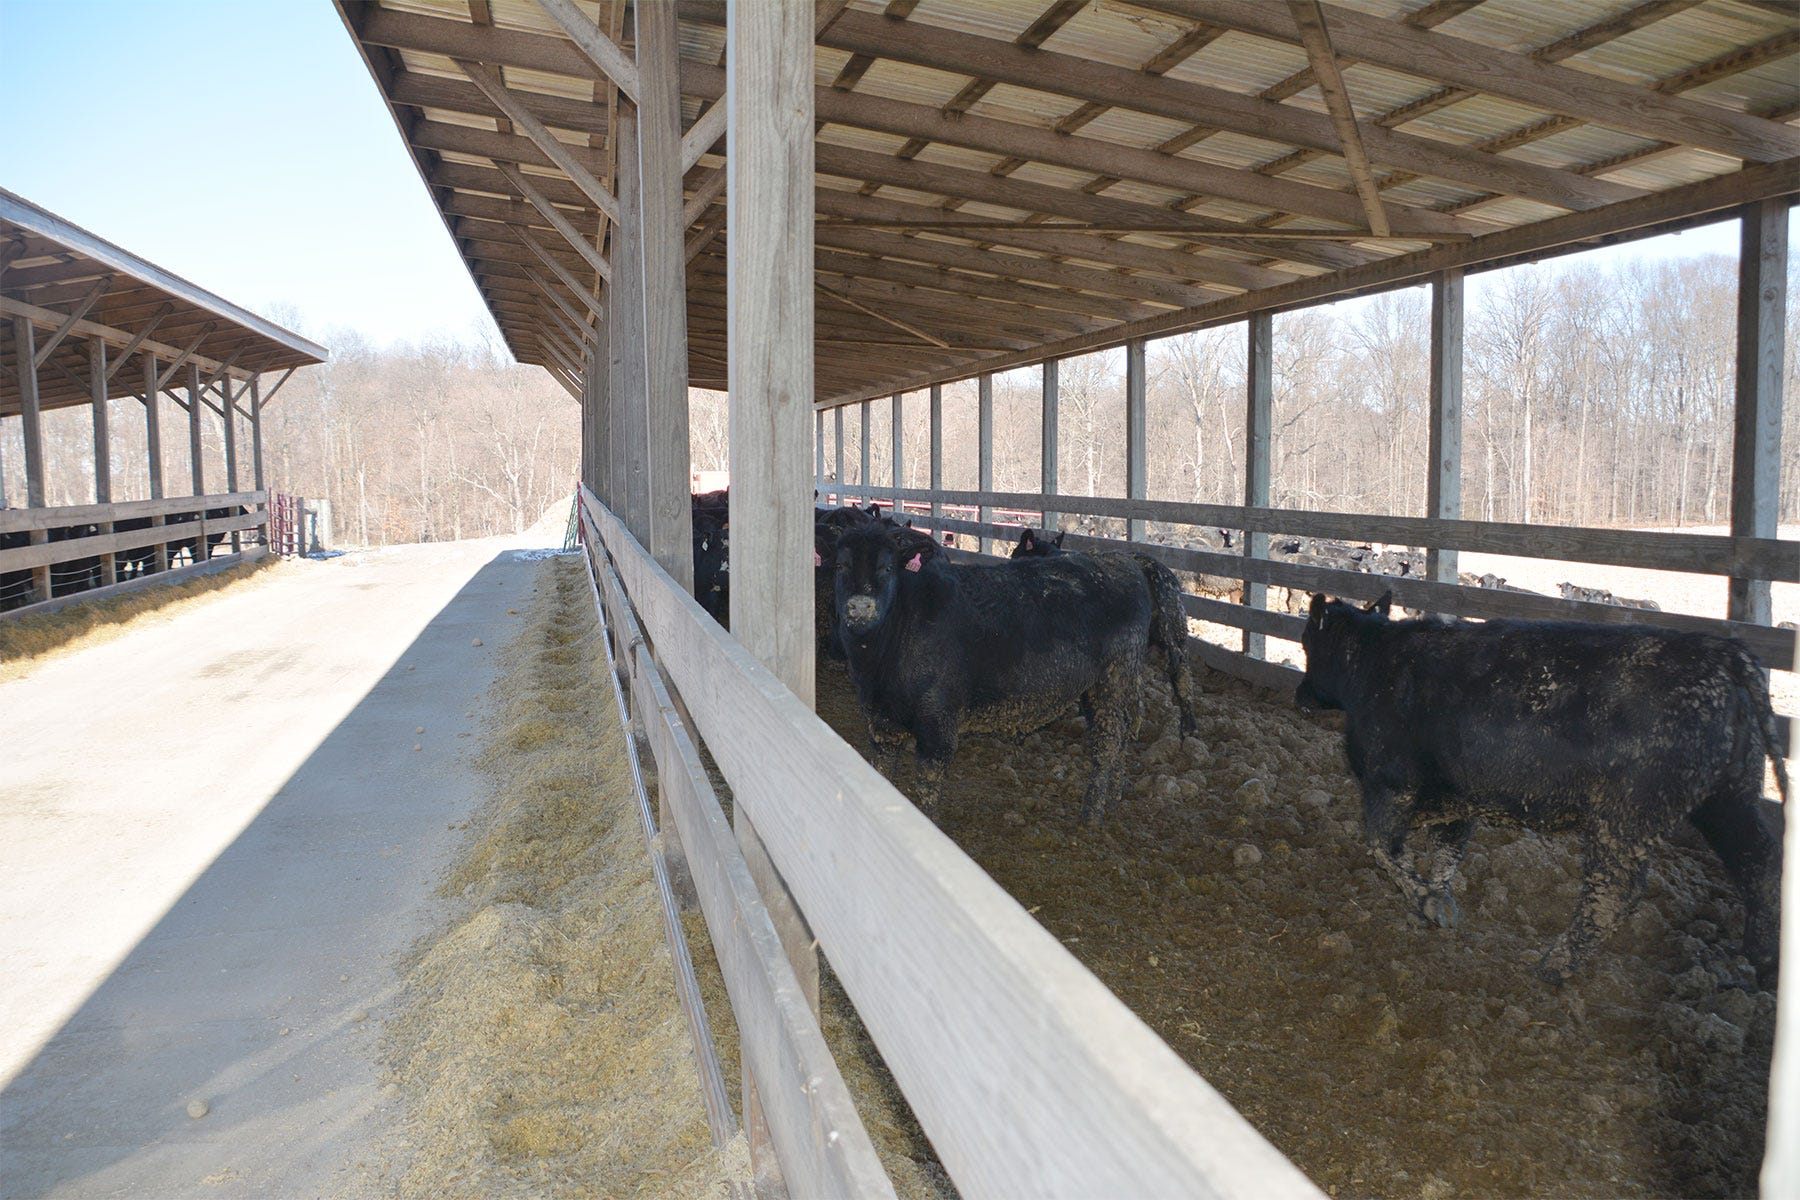 Cows feeding under a covered structure